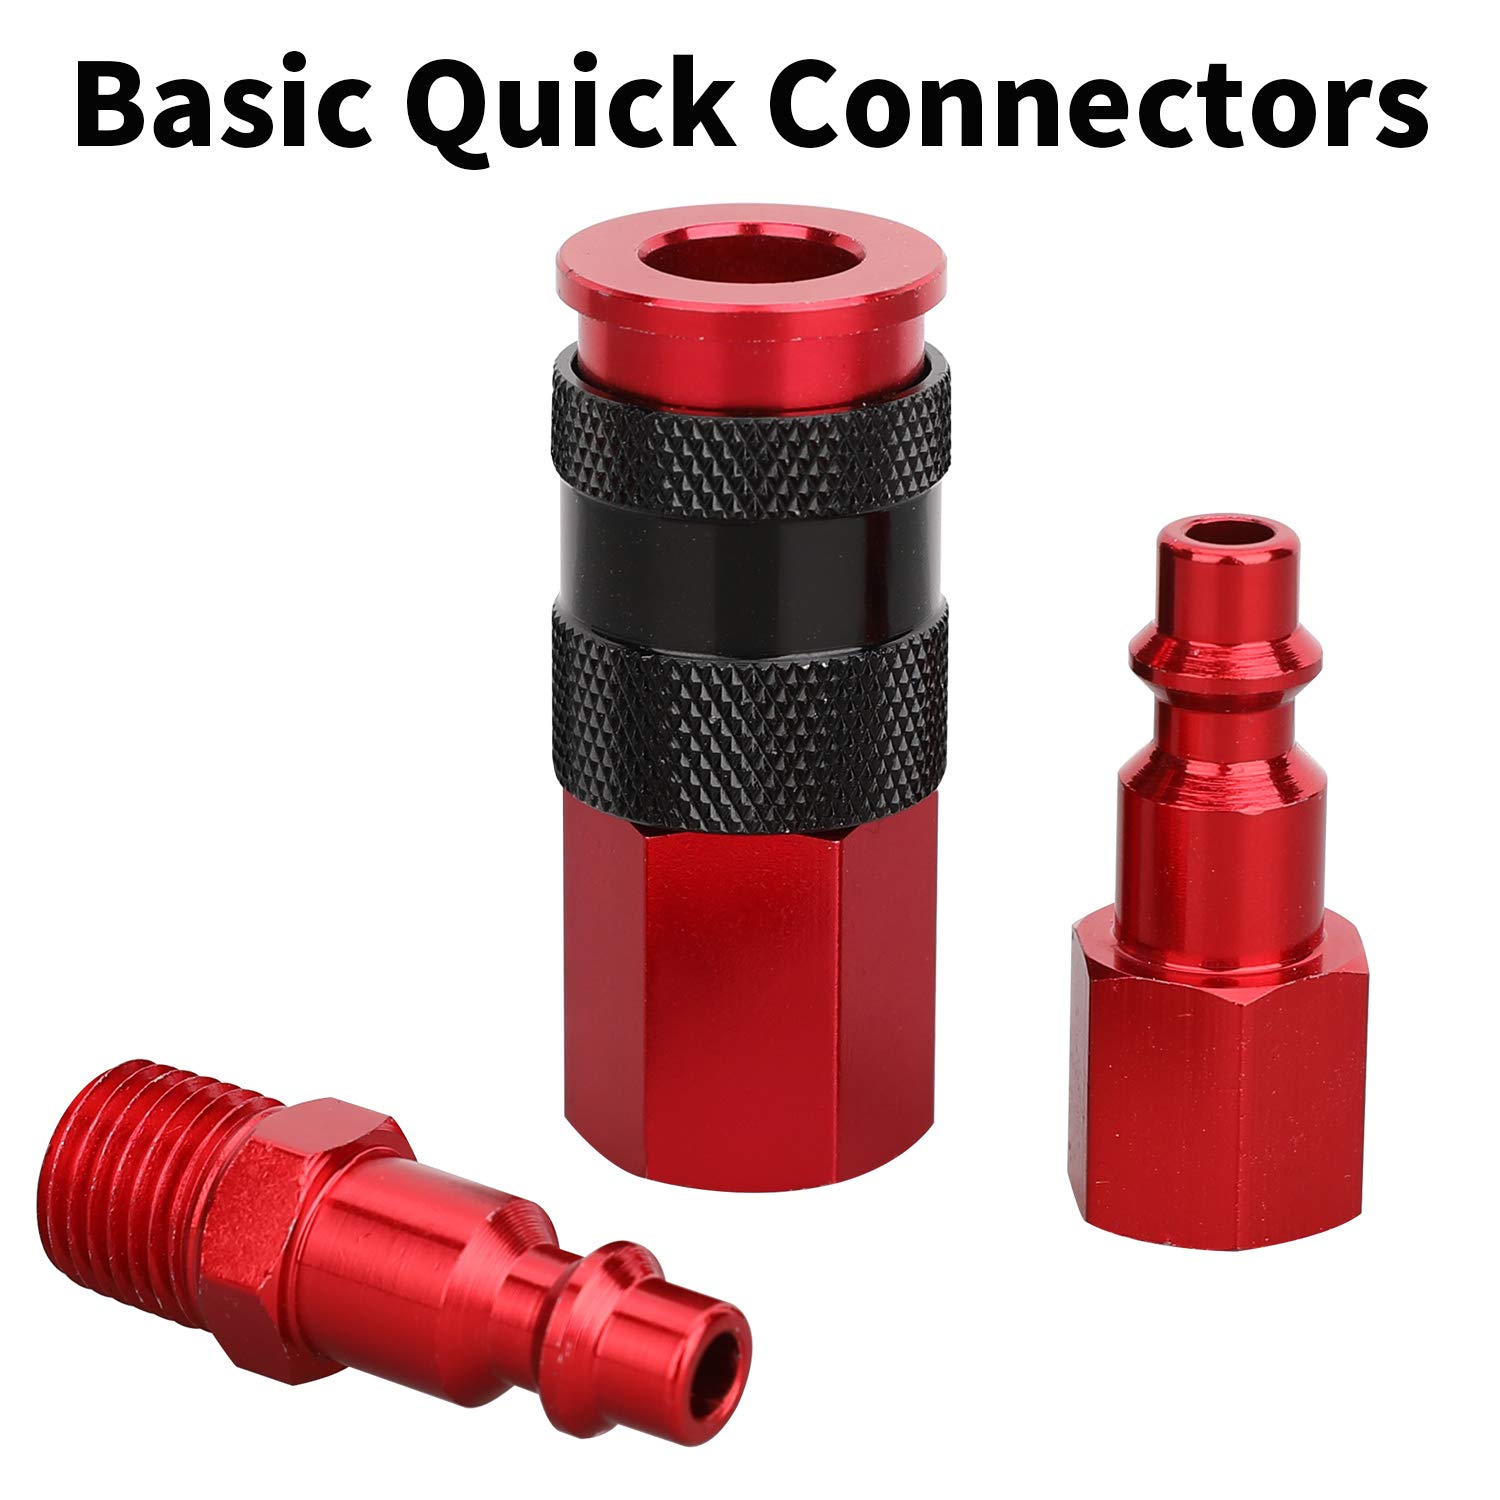 Hromee 1/4 in x 25 ft Polyurethane Recoil Air Hose with Bend Restrictors Compressor Hose with 1/4" Industrial Universal Quick Coupler and I/M Plug Kit, Red